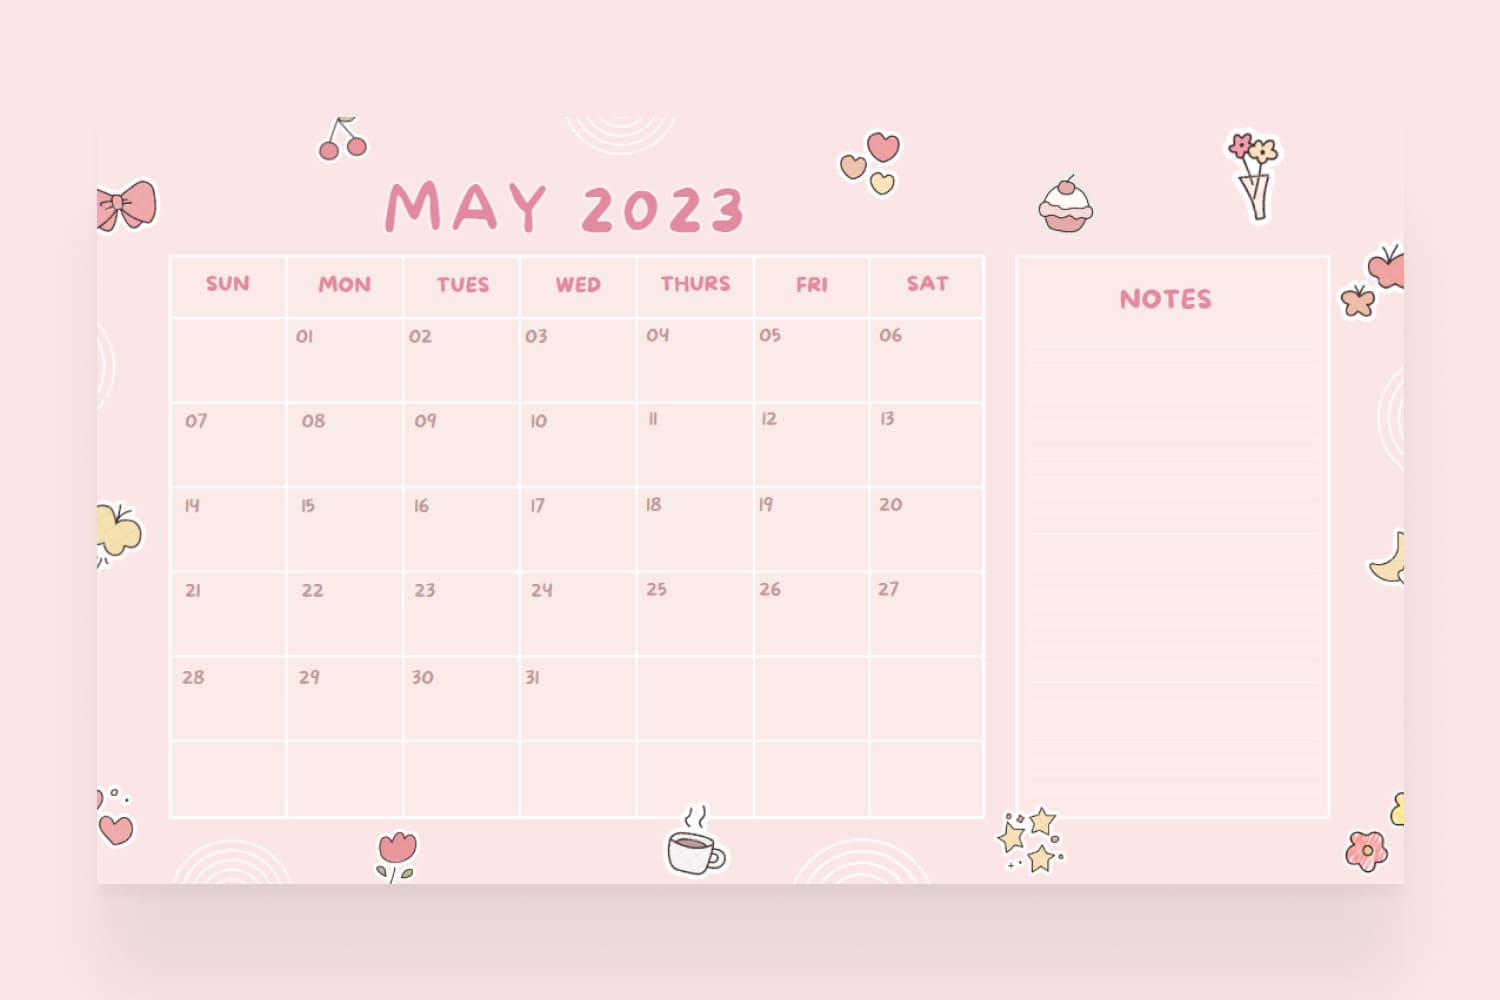 Calendar with a cute and feminine layout in a pink and white color scheme and illustrations of flowers and hearts.